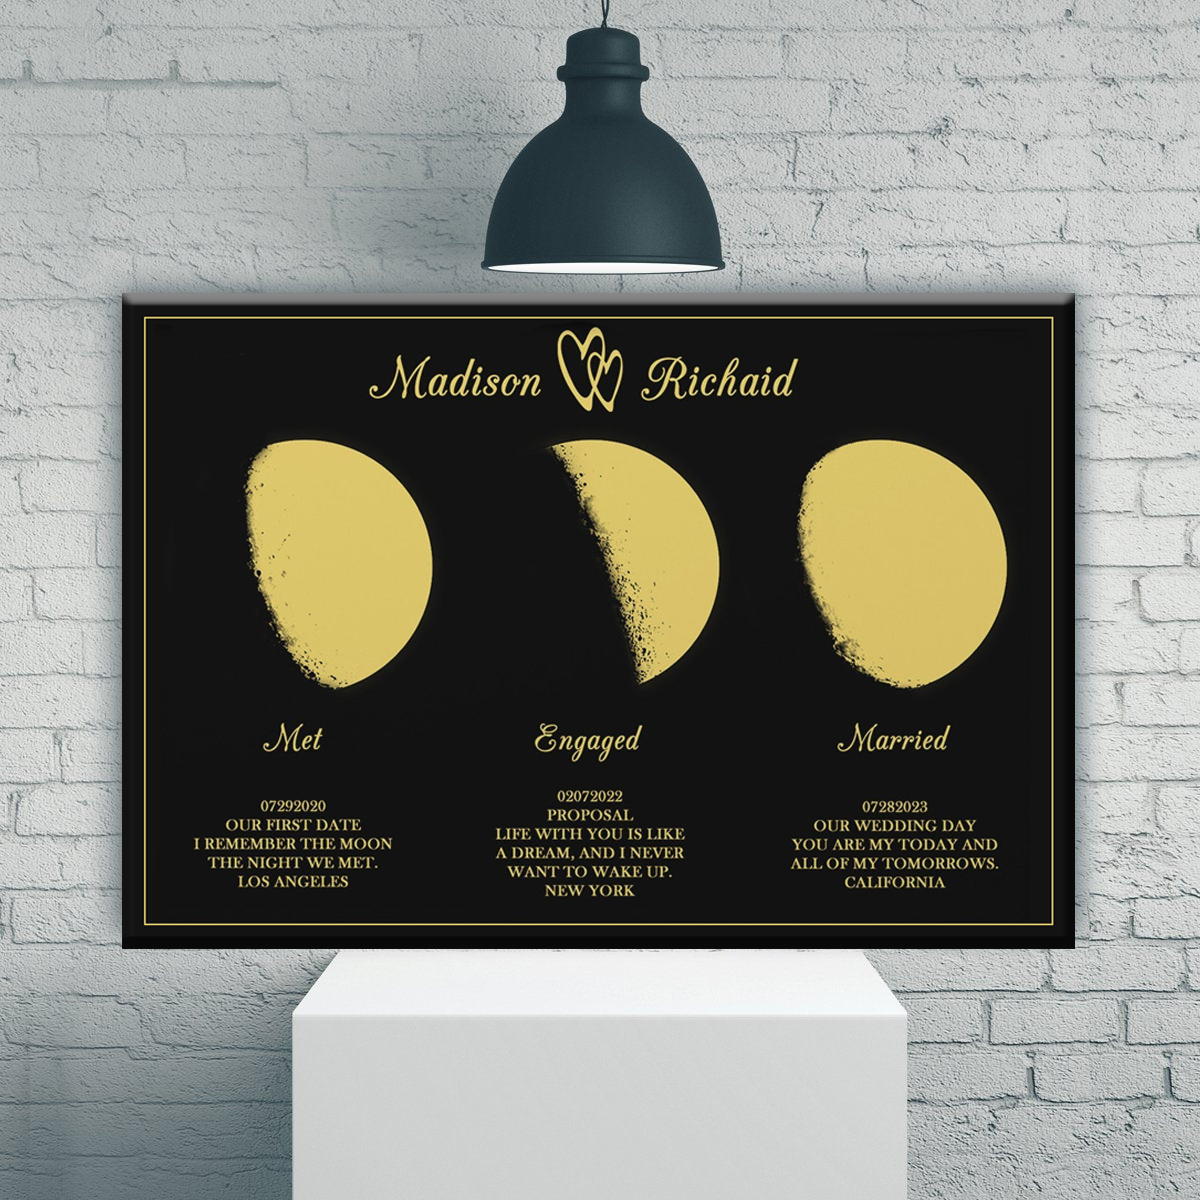 Custom Triple Moon Phase with Personalized Name and Text Frame